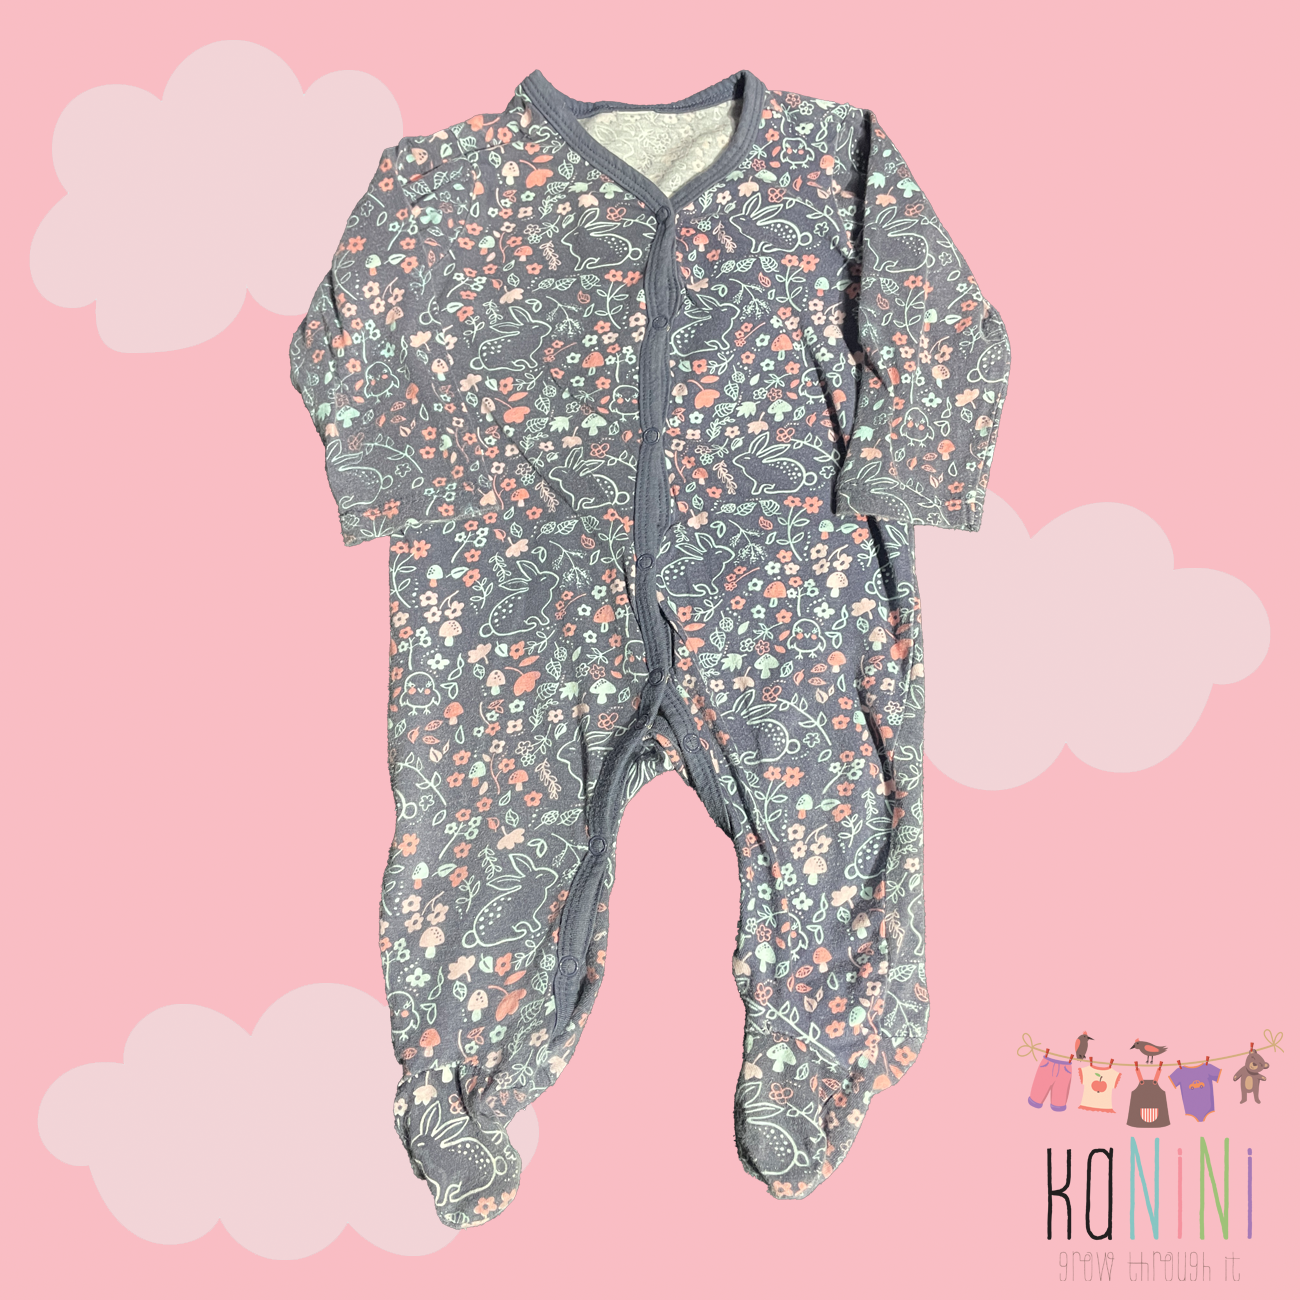 Featured image for “No Label ± 3 - 6 Months Girls Babygrow”